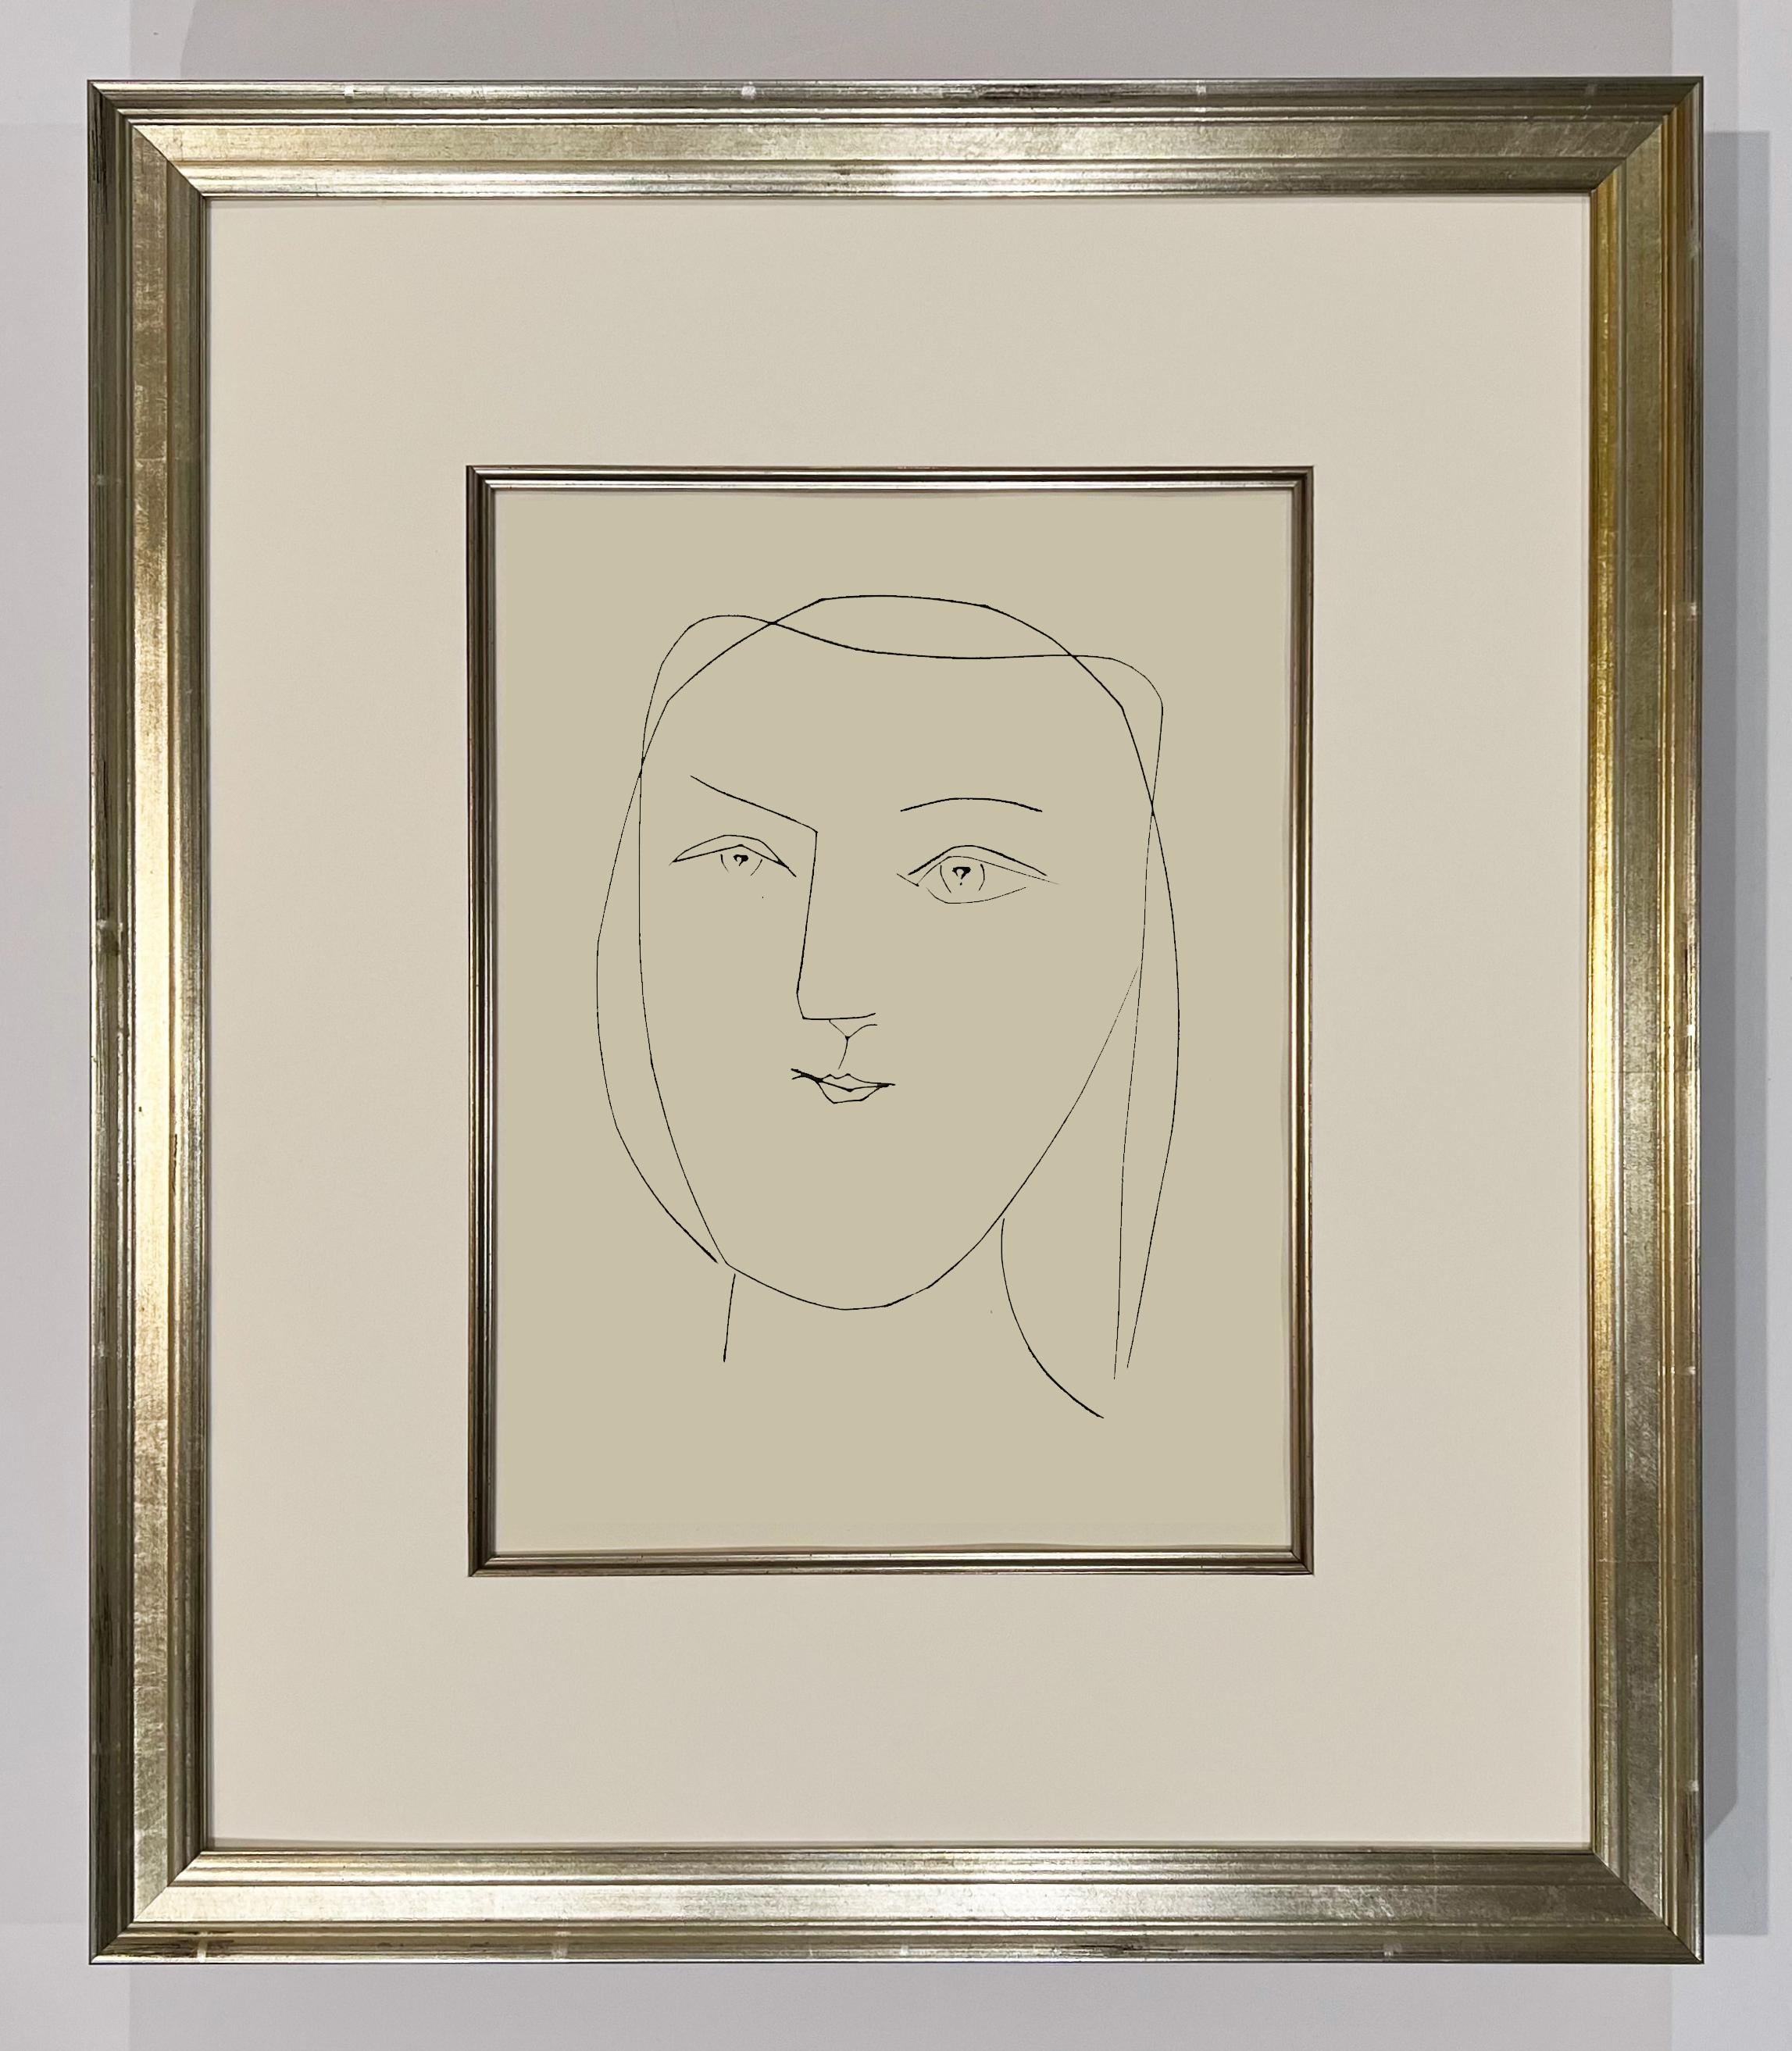 Oval Head of a Woman with Piercing Eyes (Plate XXI), from Carmen - Print by Pablo Picasso